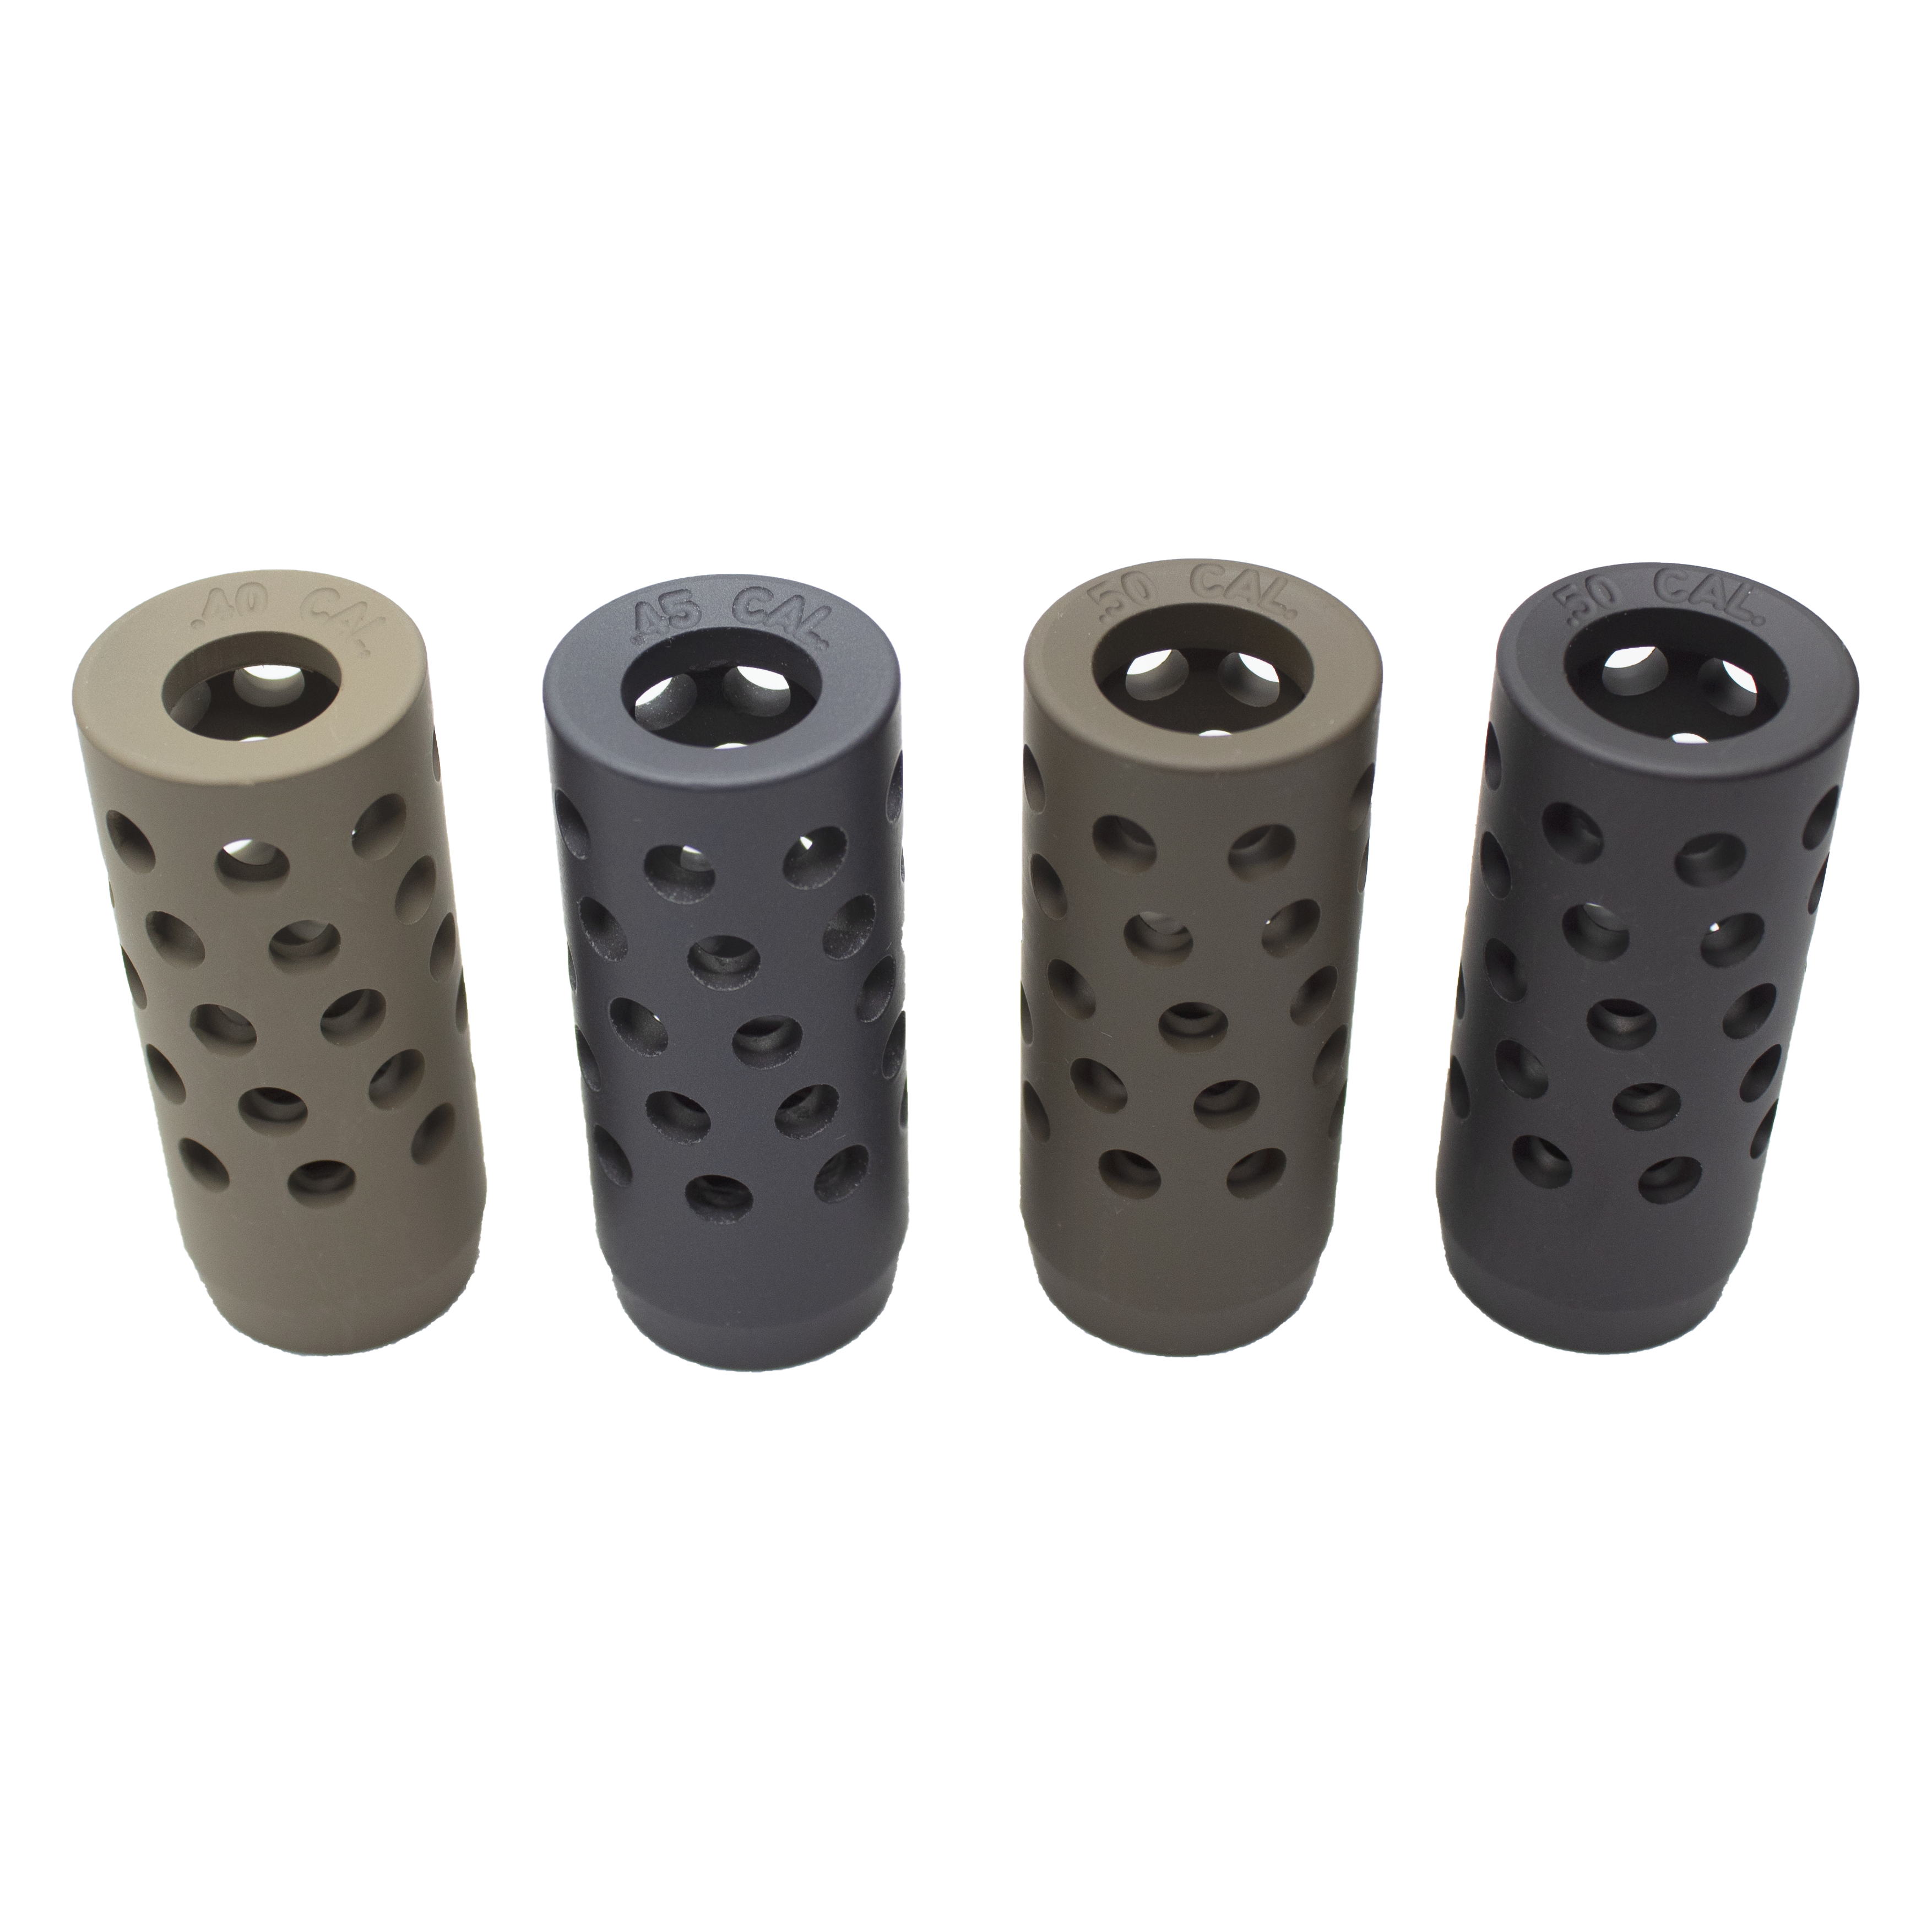 Will these muzzle brakes fit flush on the accura lr-x?